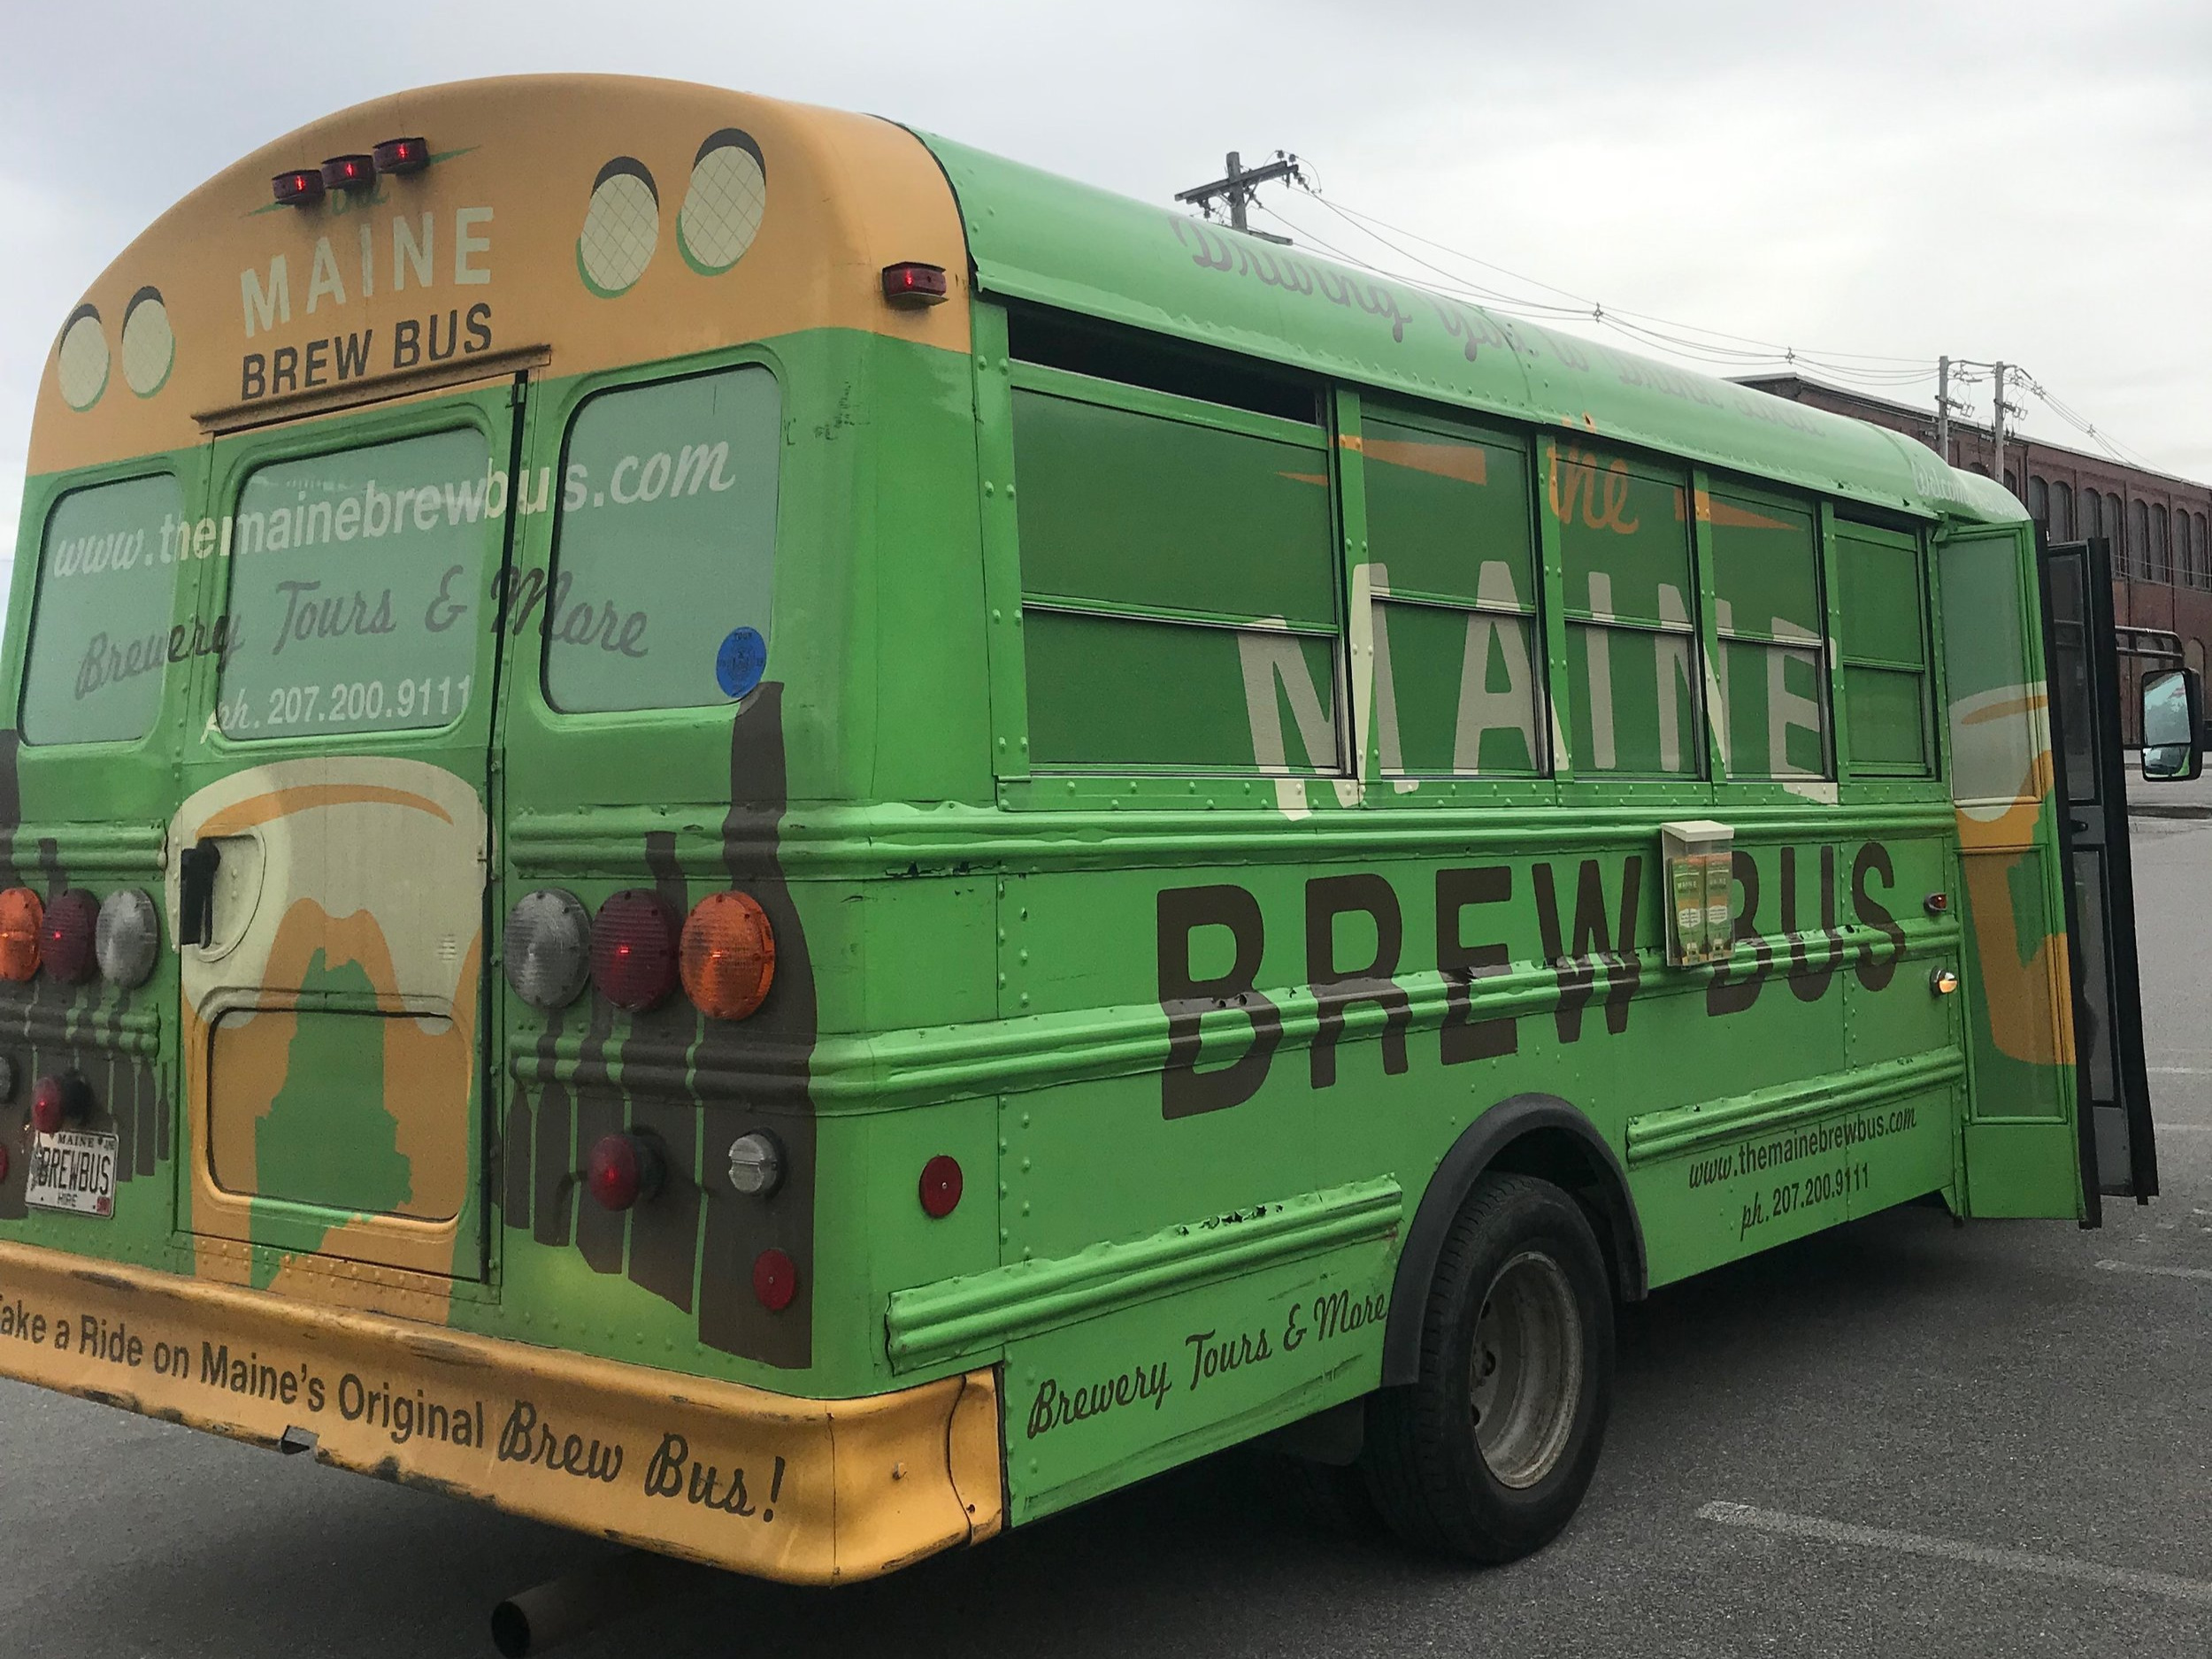  Portland Maine Beer Tours with the Maine Brew Bus 